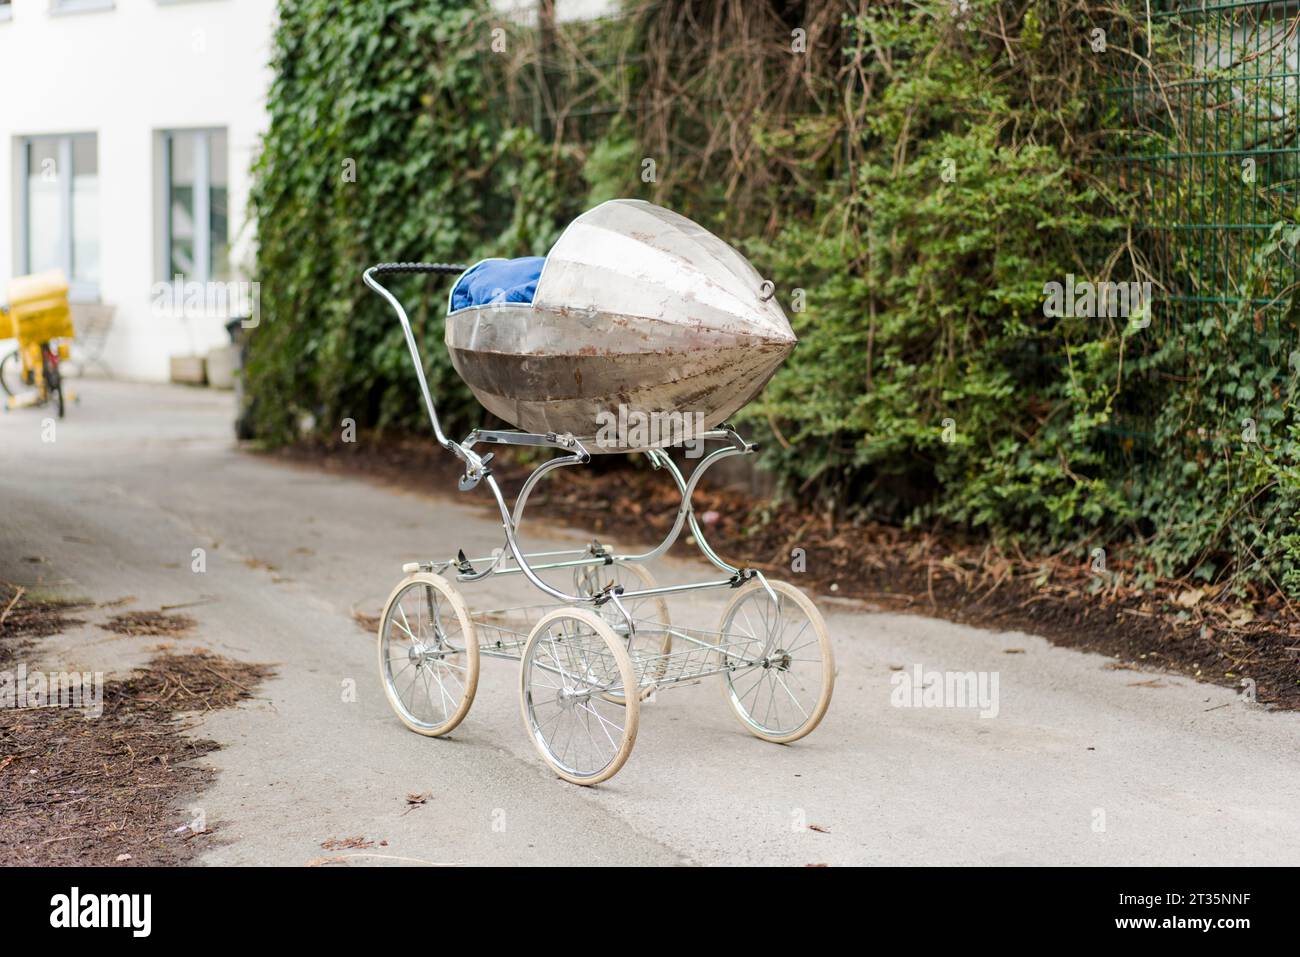 Abandoned baby stroller on road Stock Photo